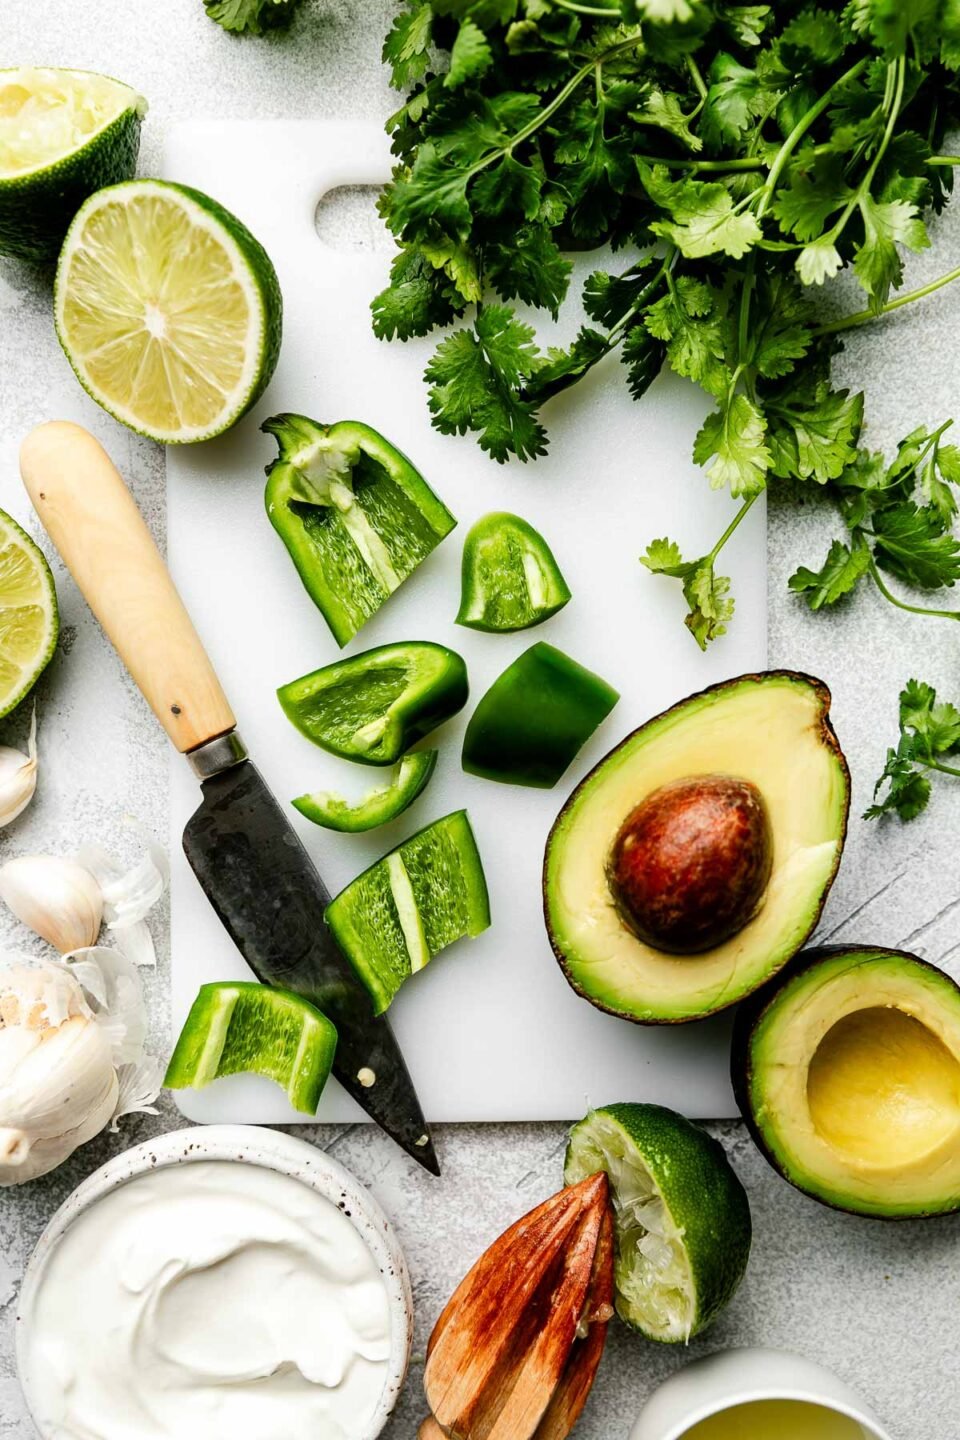 An overhead shot of ingredients displayed on a white cutting board and a grey textured surface: sliced jalapeno, halved avocado, halved limes, sour cream, garlic and cilantro.